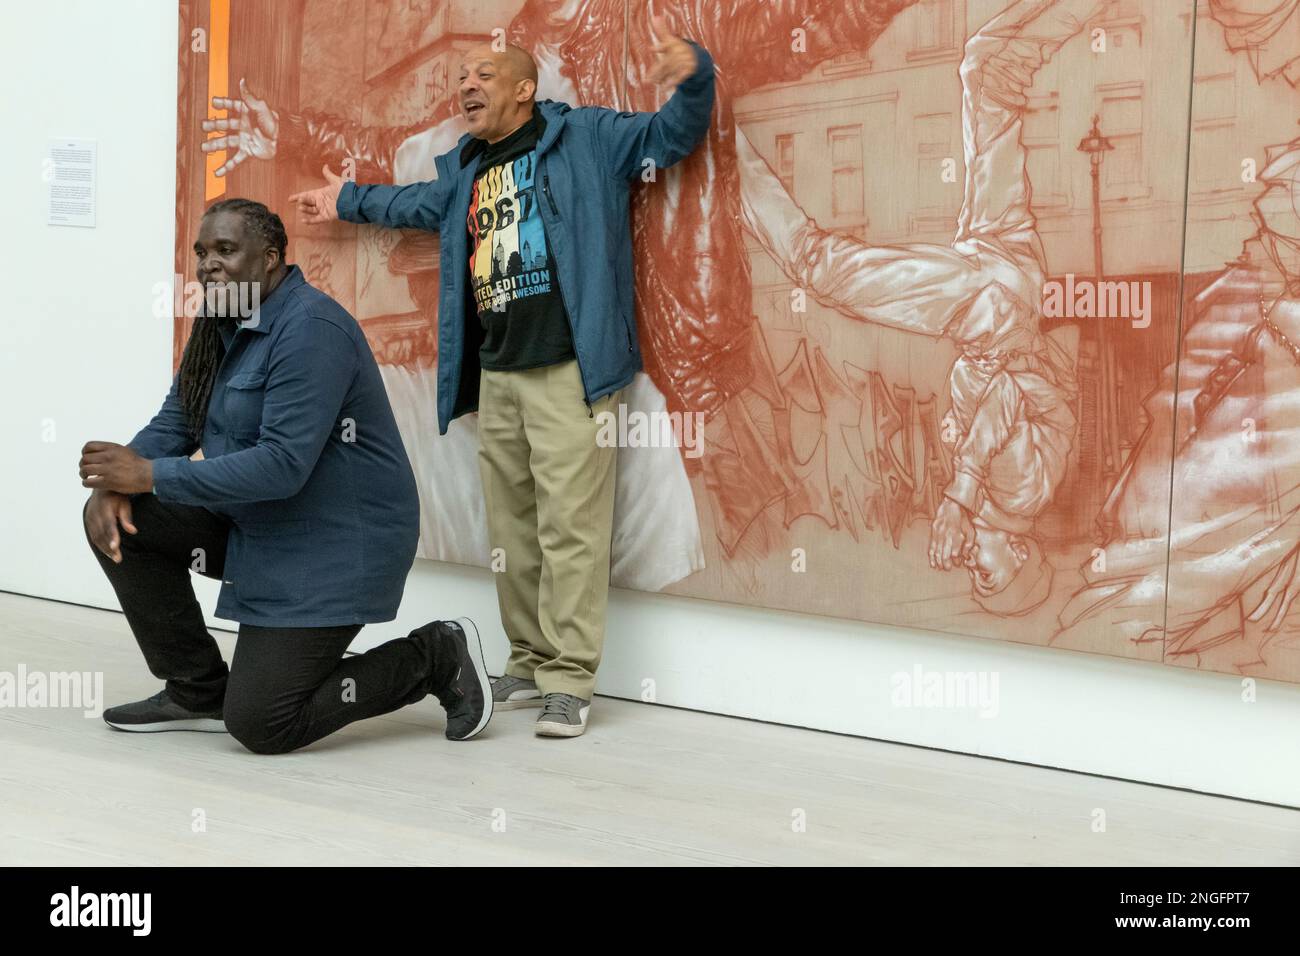 The opening of'Beyond the Streets graffiti art exhibition at the Saatchi Gallery London UK 16/2/23 Stock Photo